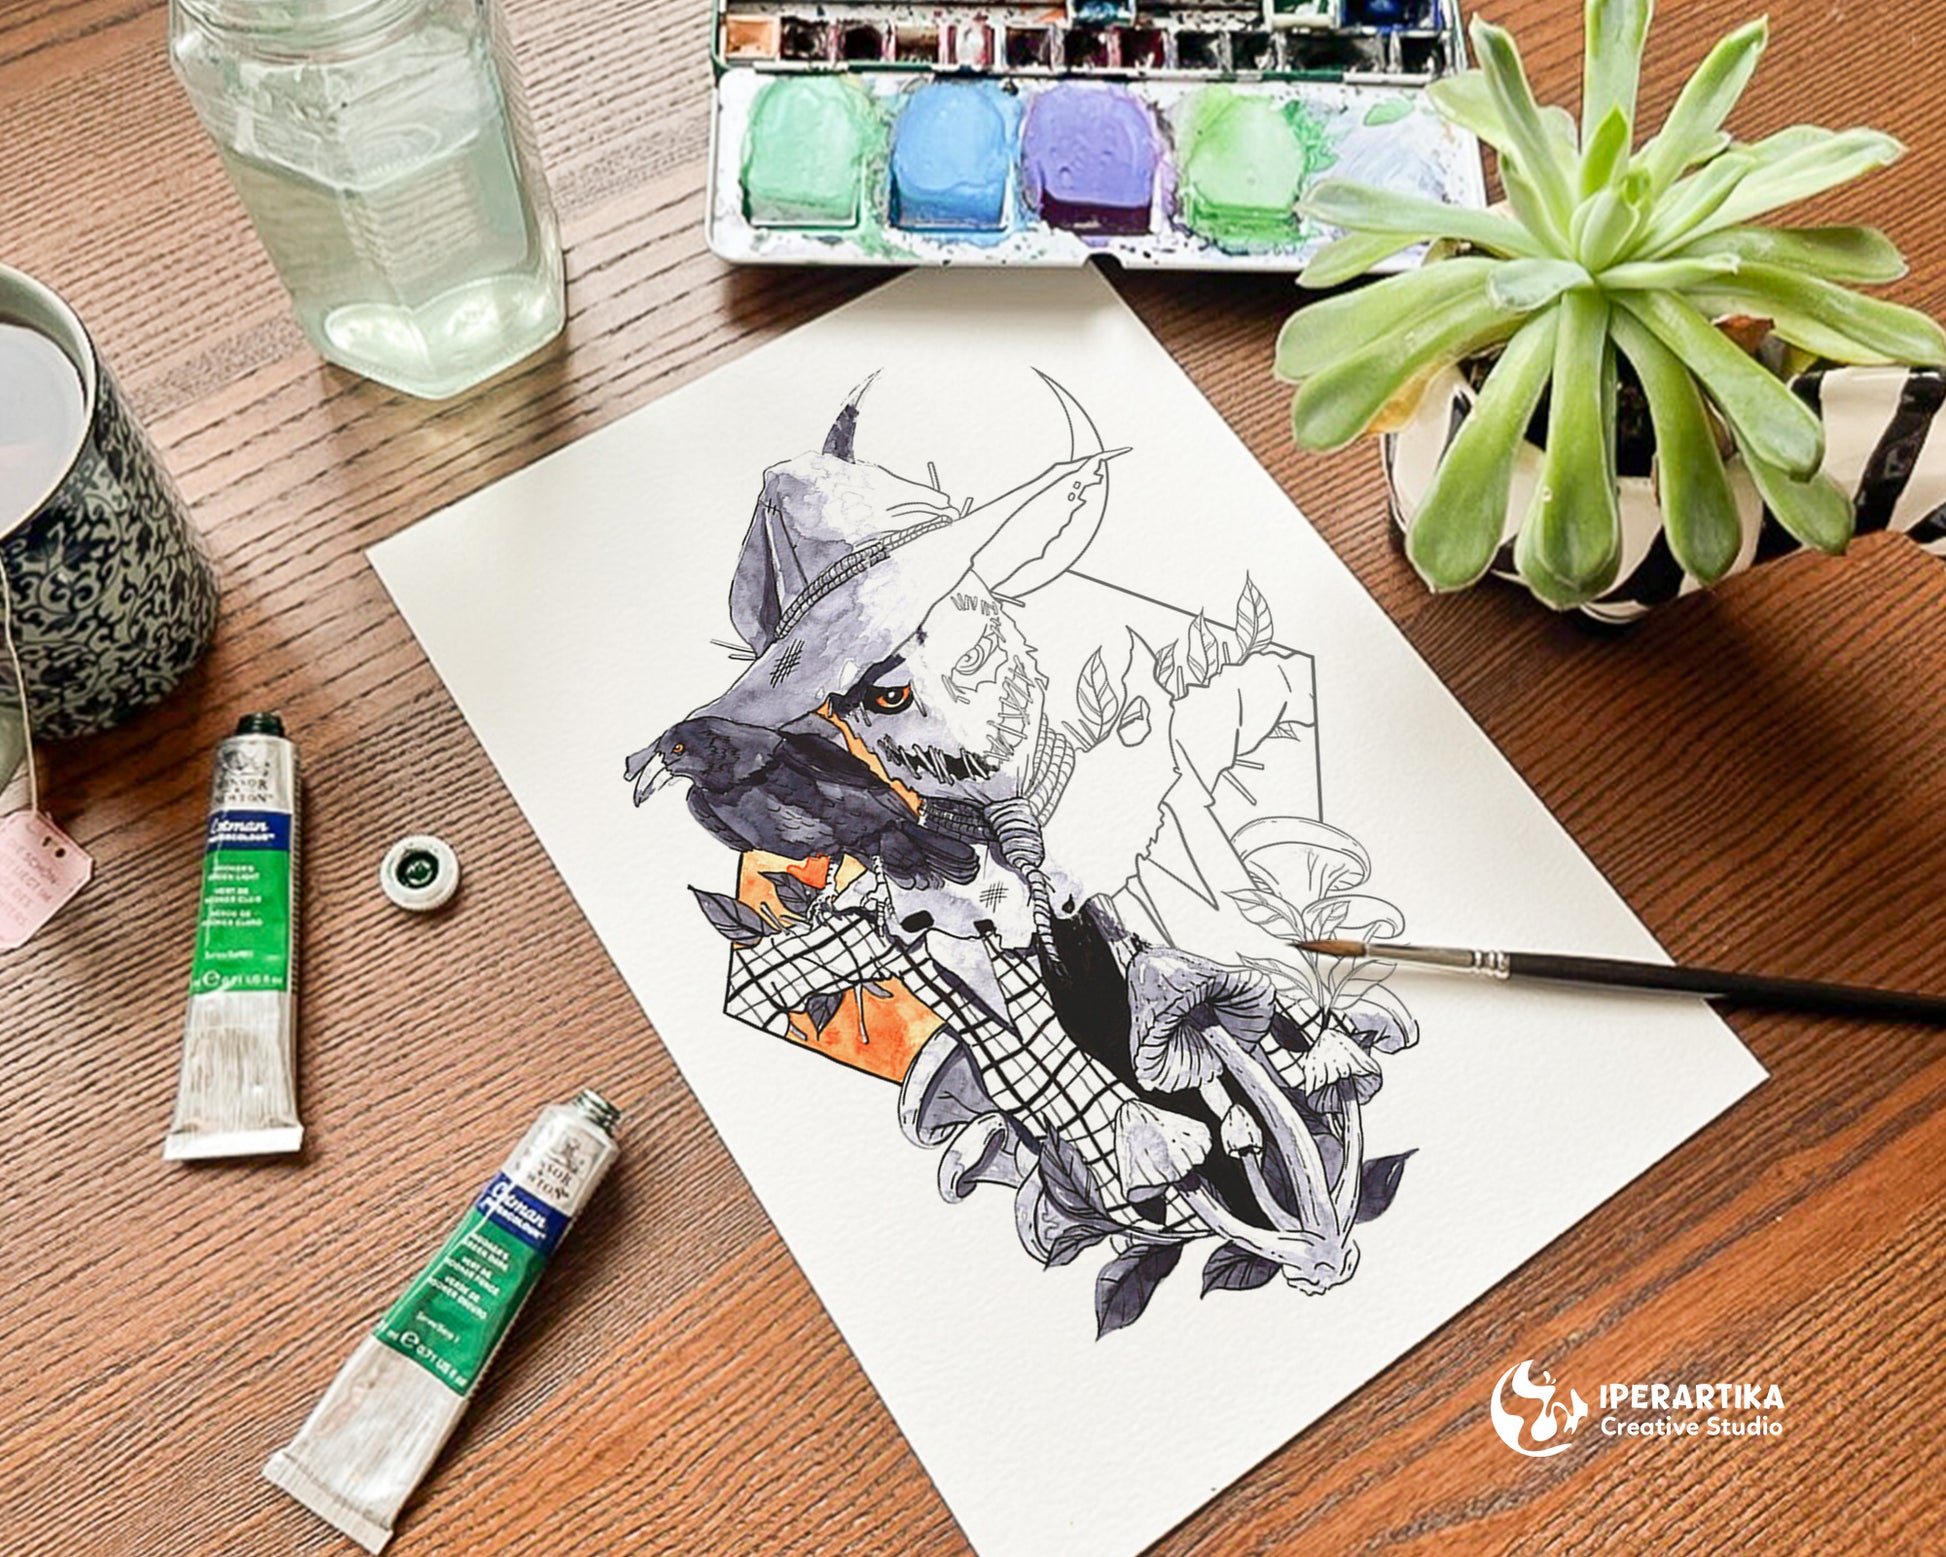 Halloween coloring pages for adults. Witch, werewolf, scarecrow, la catrina, black cat, plague doctor, vampire, grip reaper coloring pages. Halloween art line to color. IPERARTIKA templates for painting